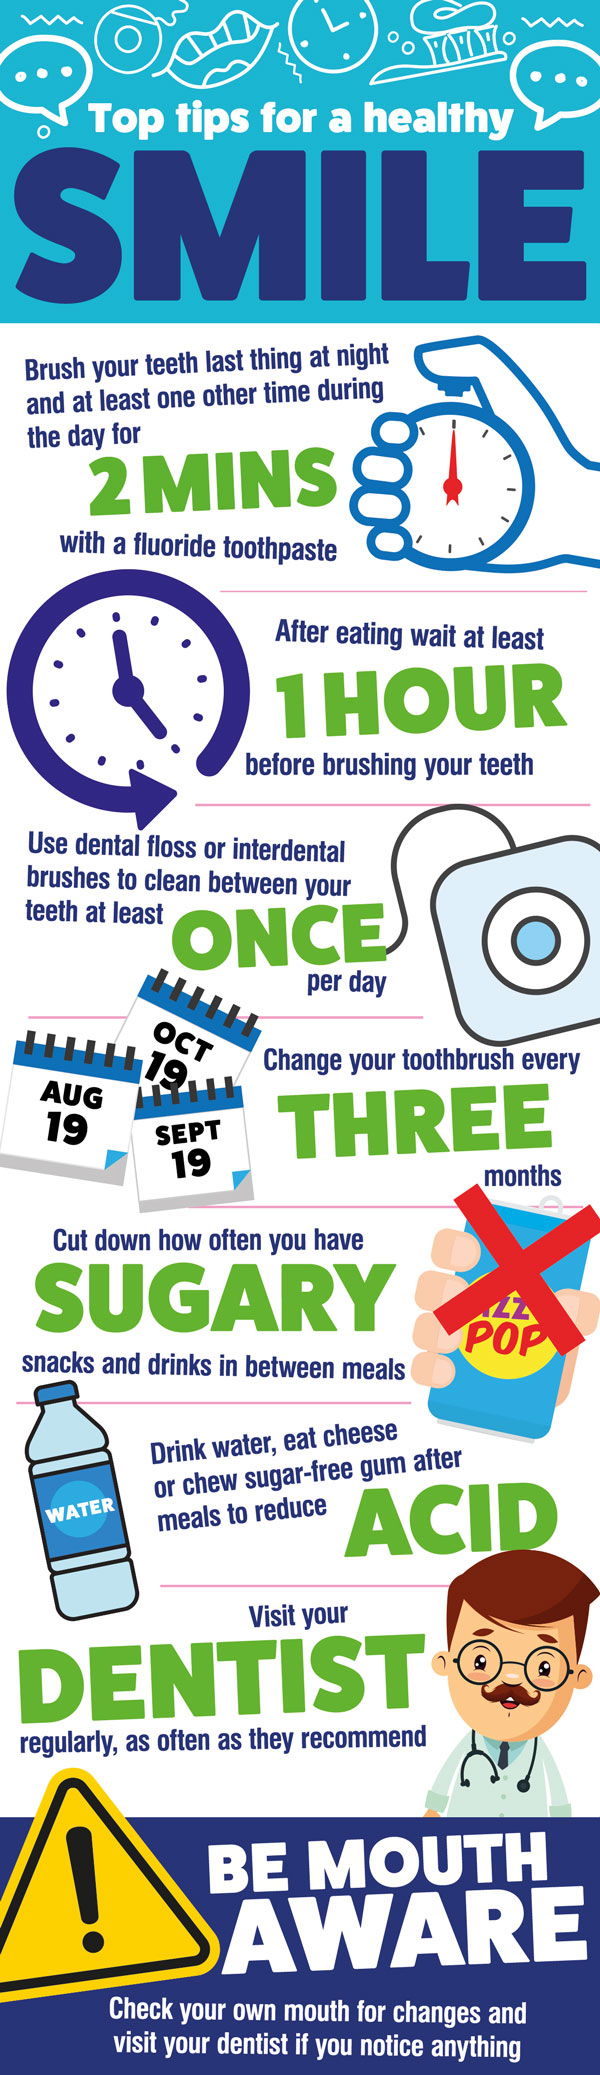 Top tips for a healthy smile